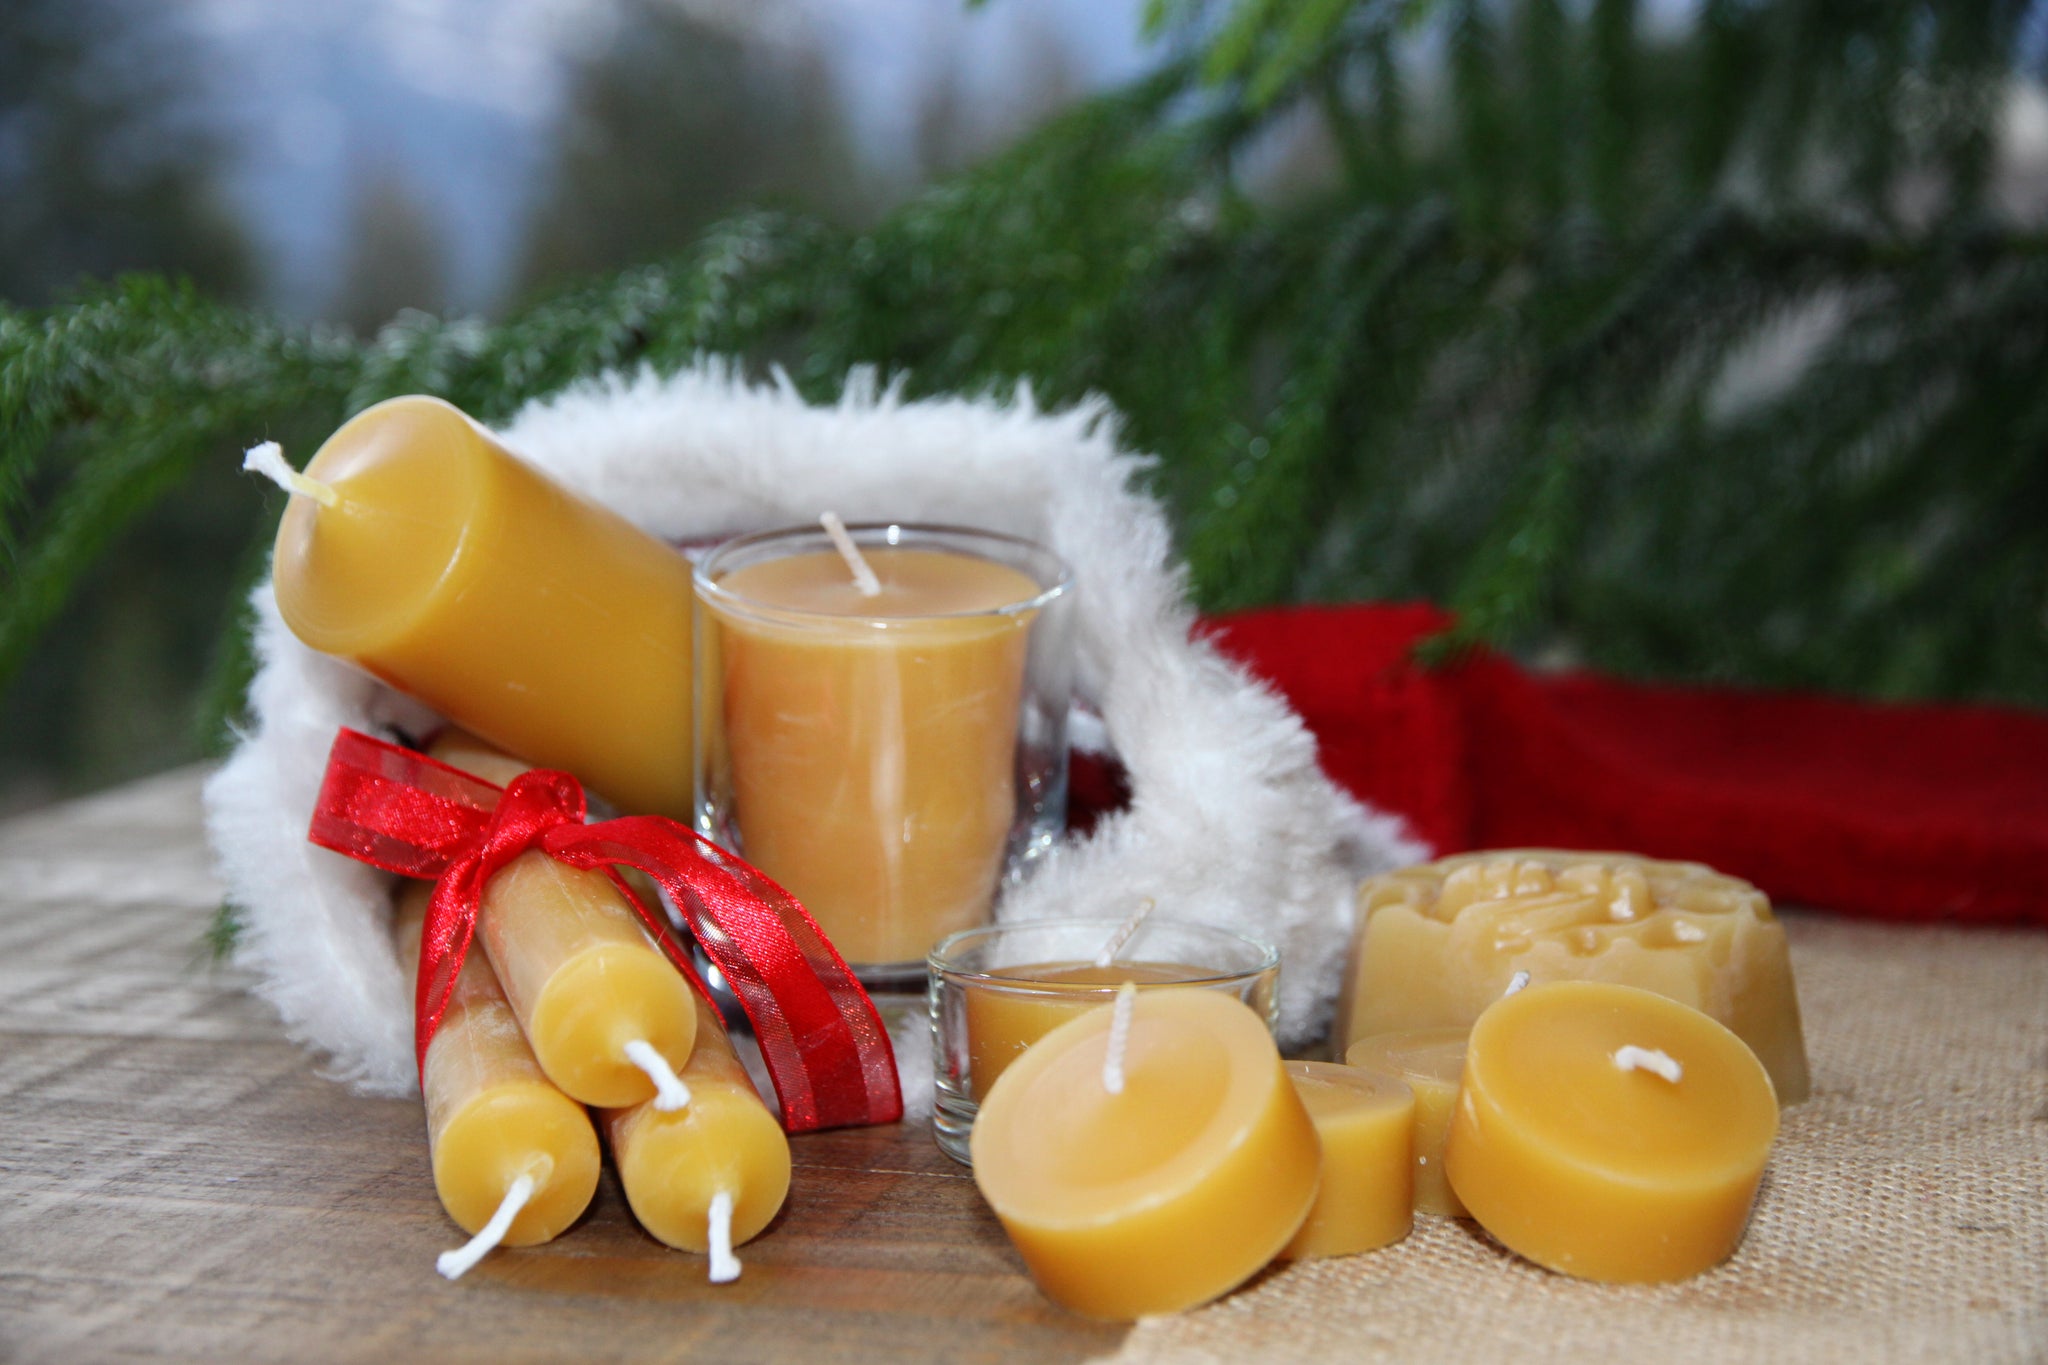 Merry Christmas from Honey Candles!